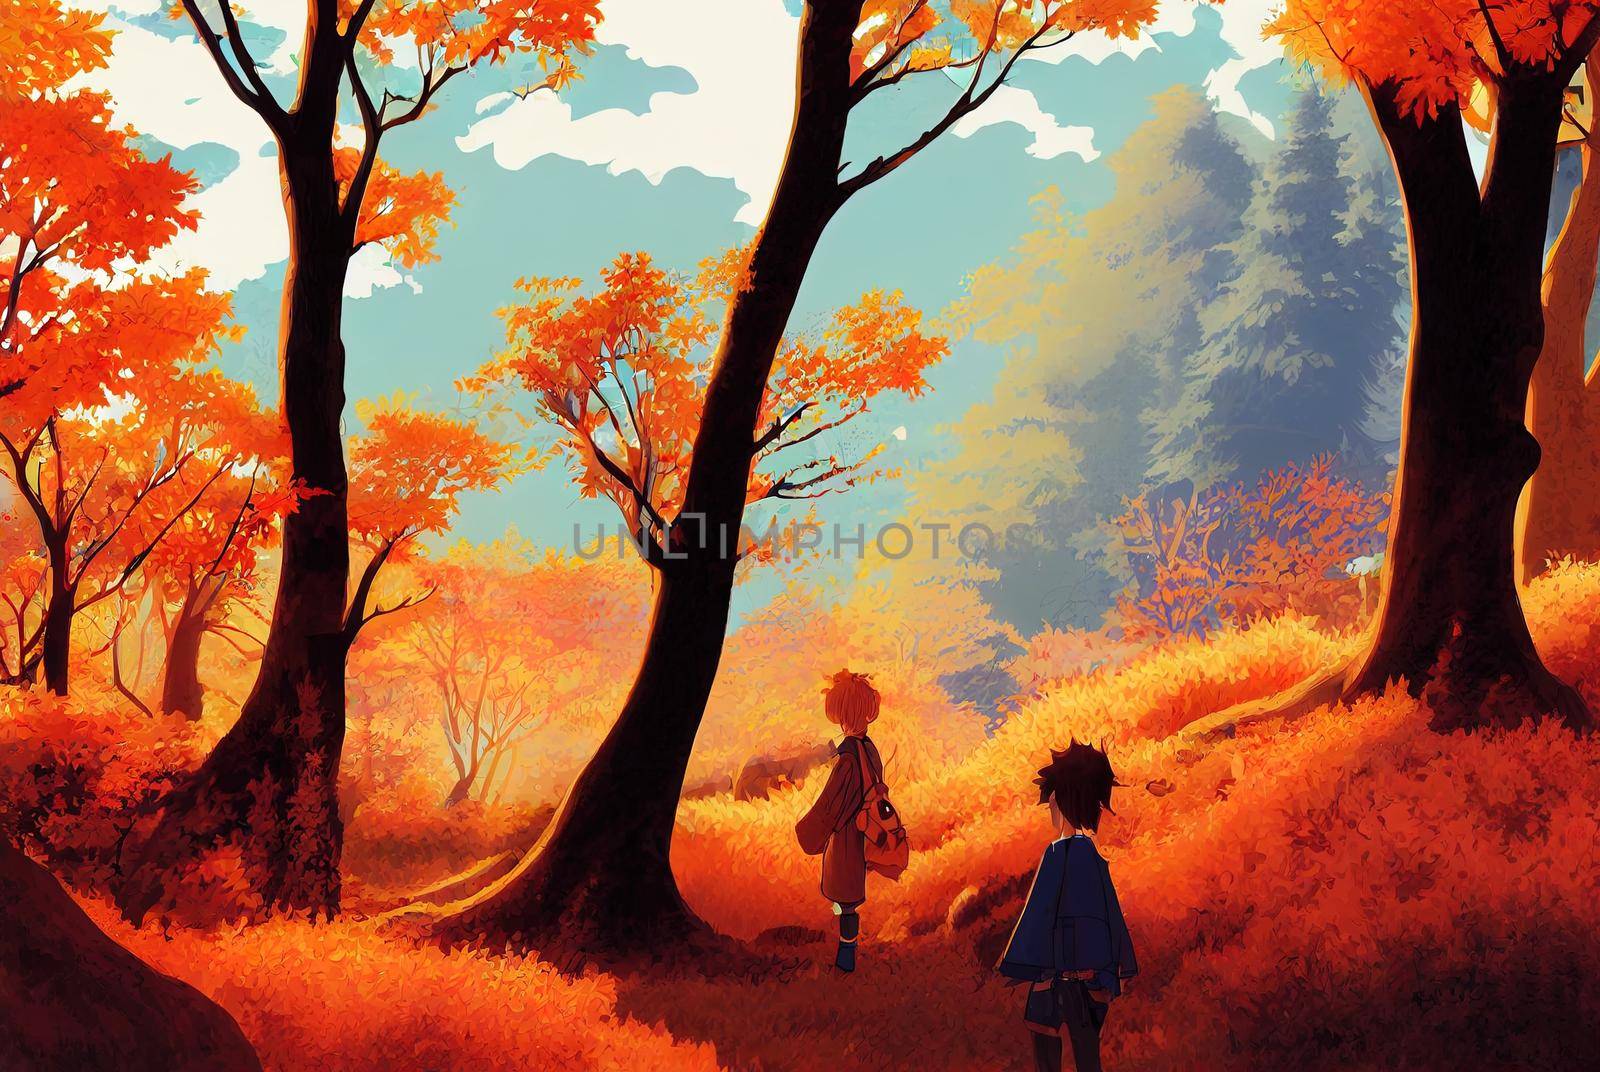 Autumn characters outdoor activities illustration autumn friends travel autumn High quality 2d illustration. by 2ragon